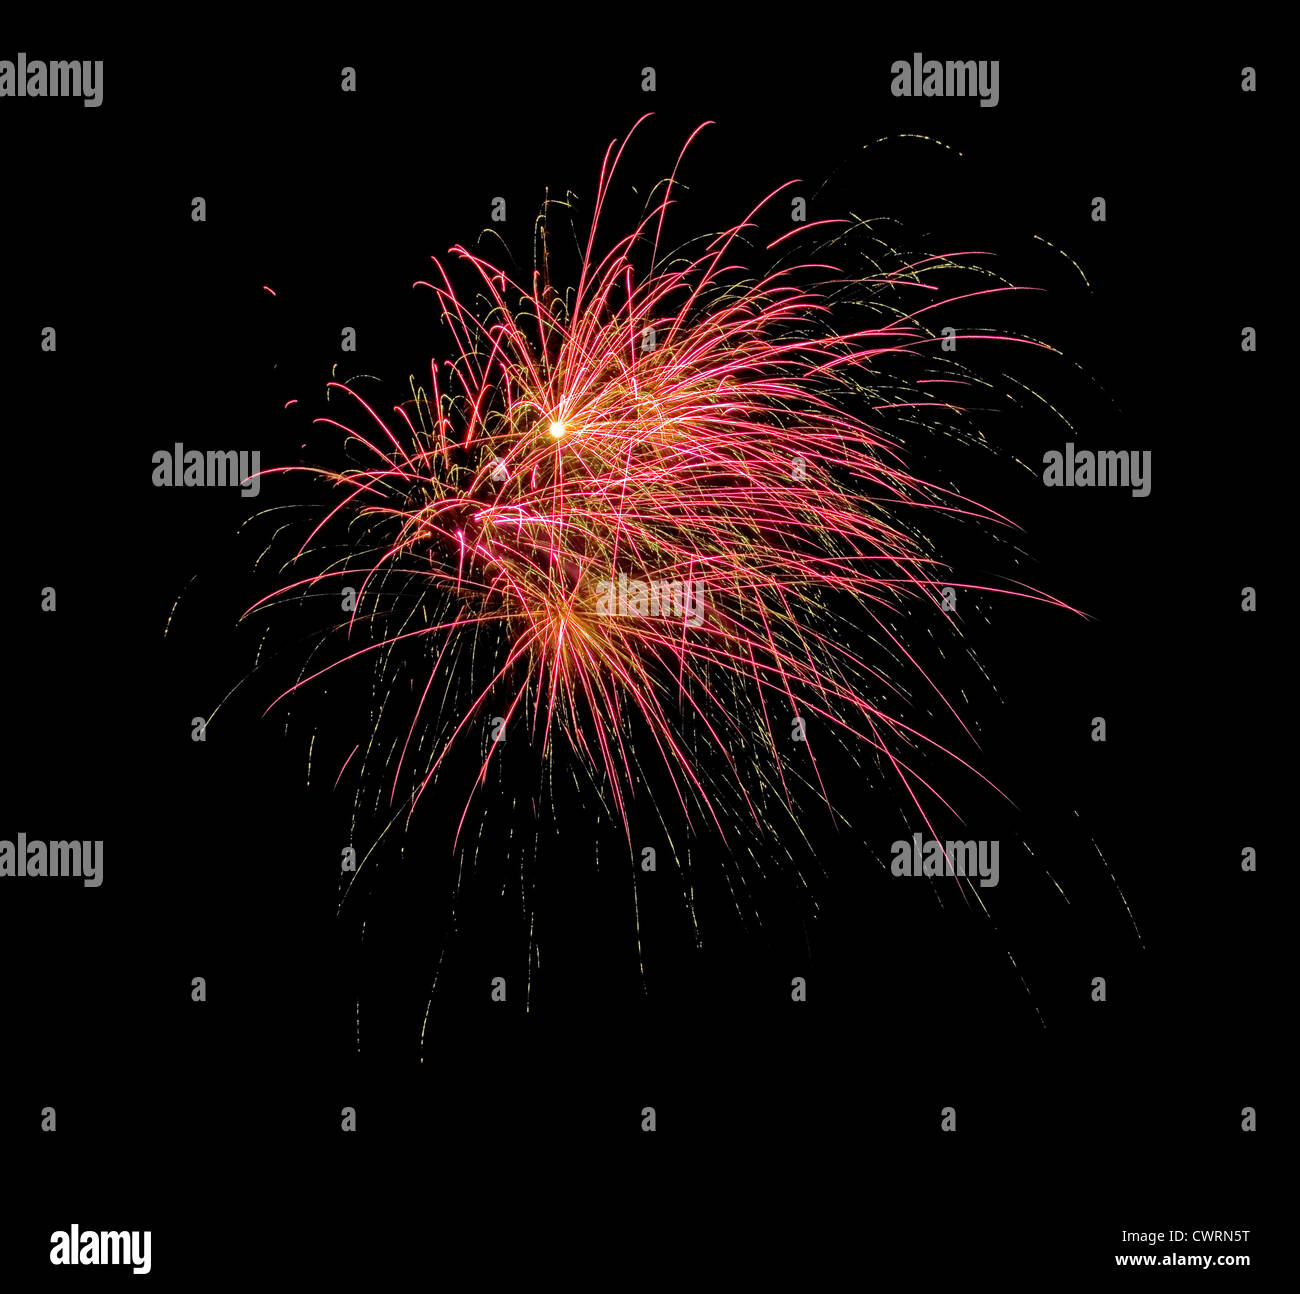 multiple fireworks explode in a burst with black background Stock Photo